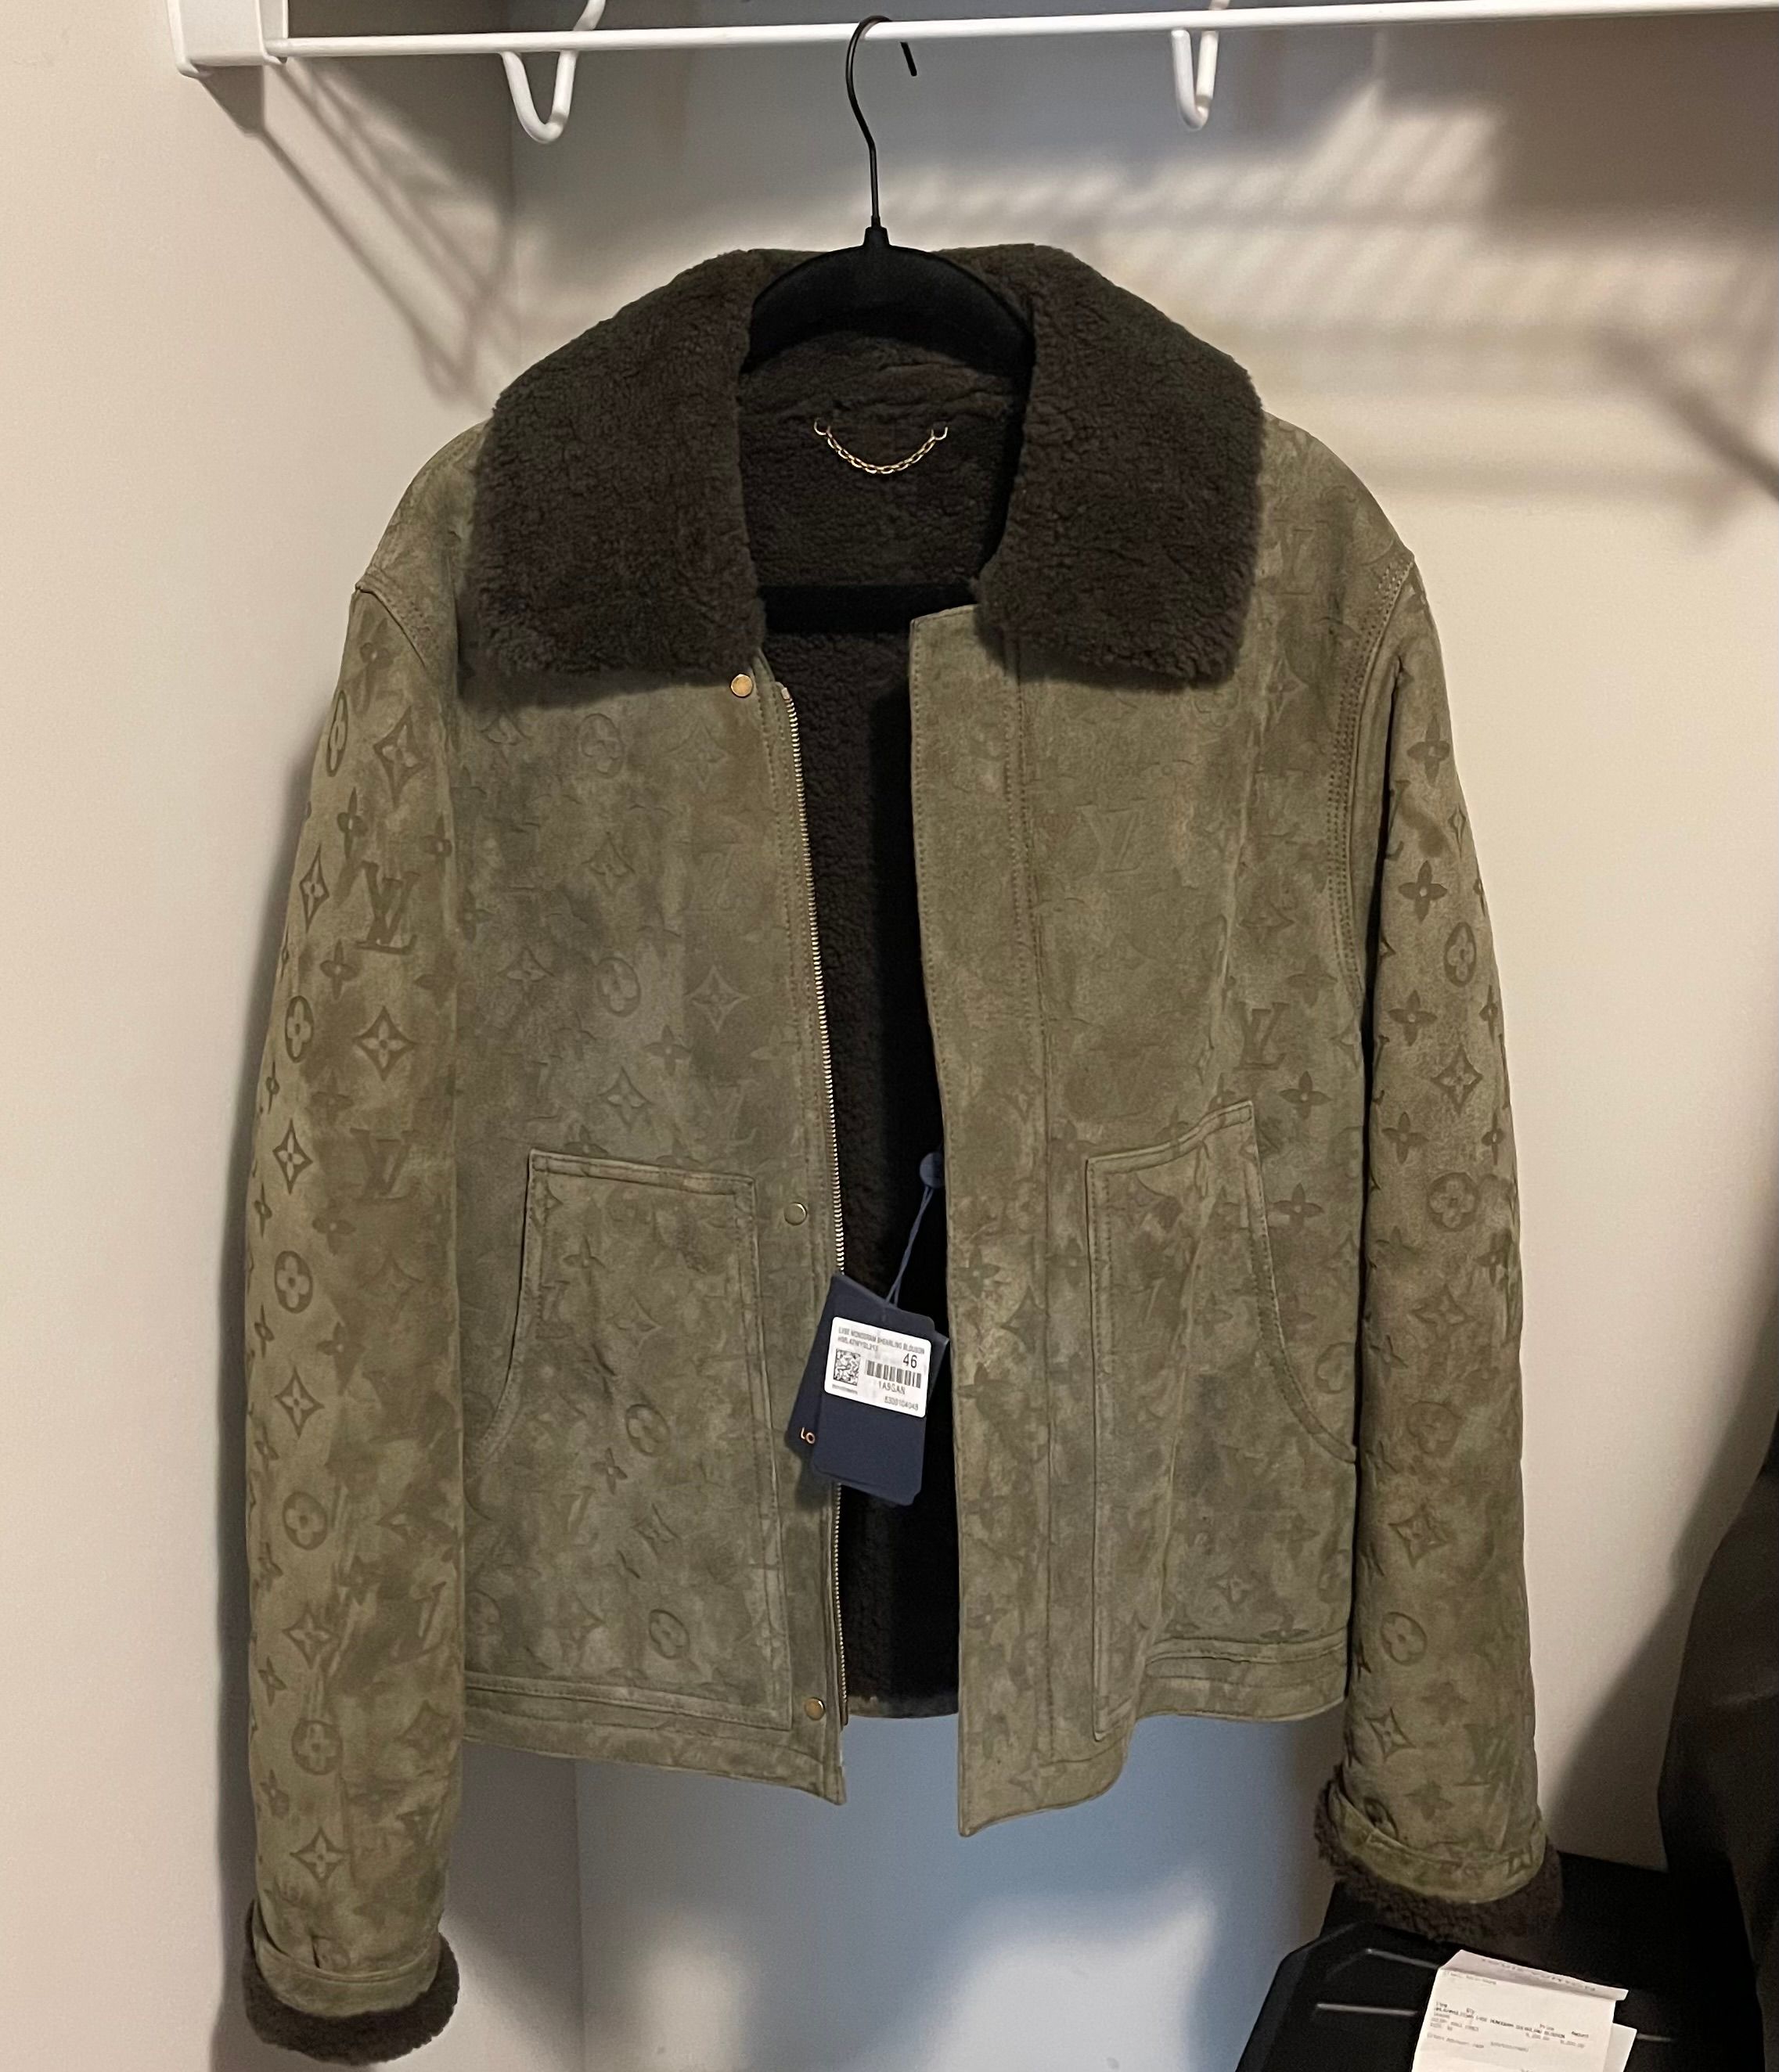 LVSE Monogram Shearling Blouson- my favourite LV purchase from the